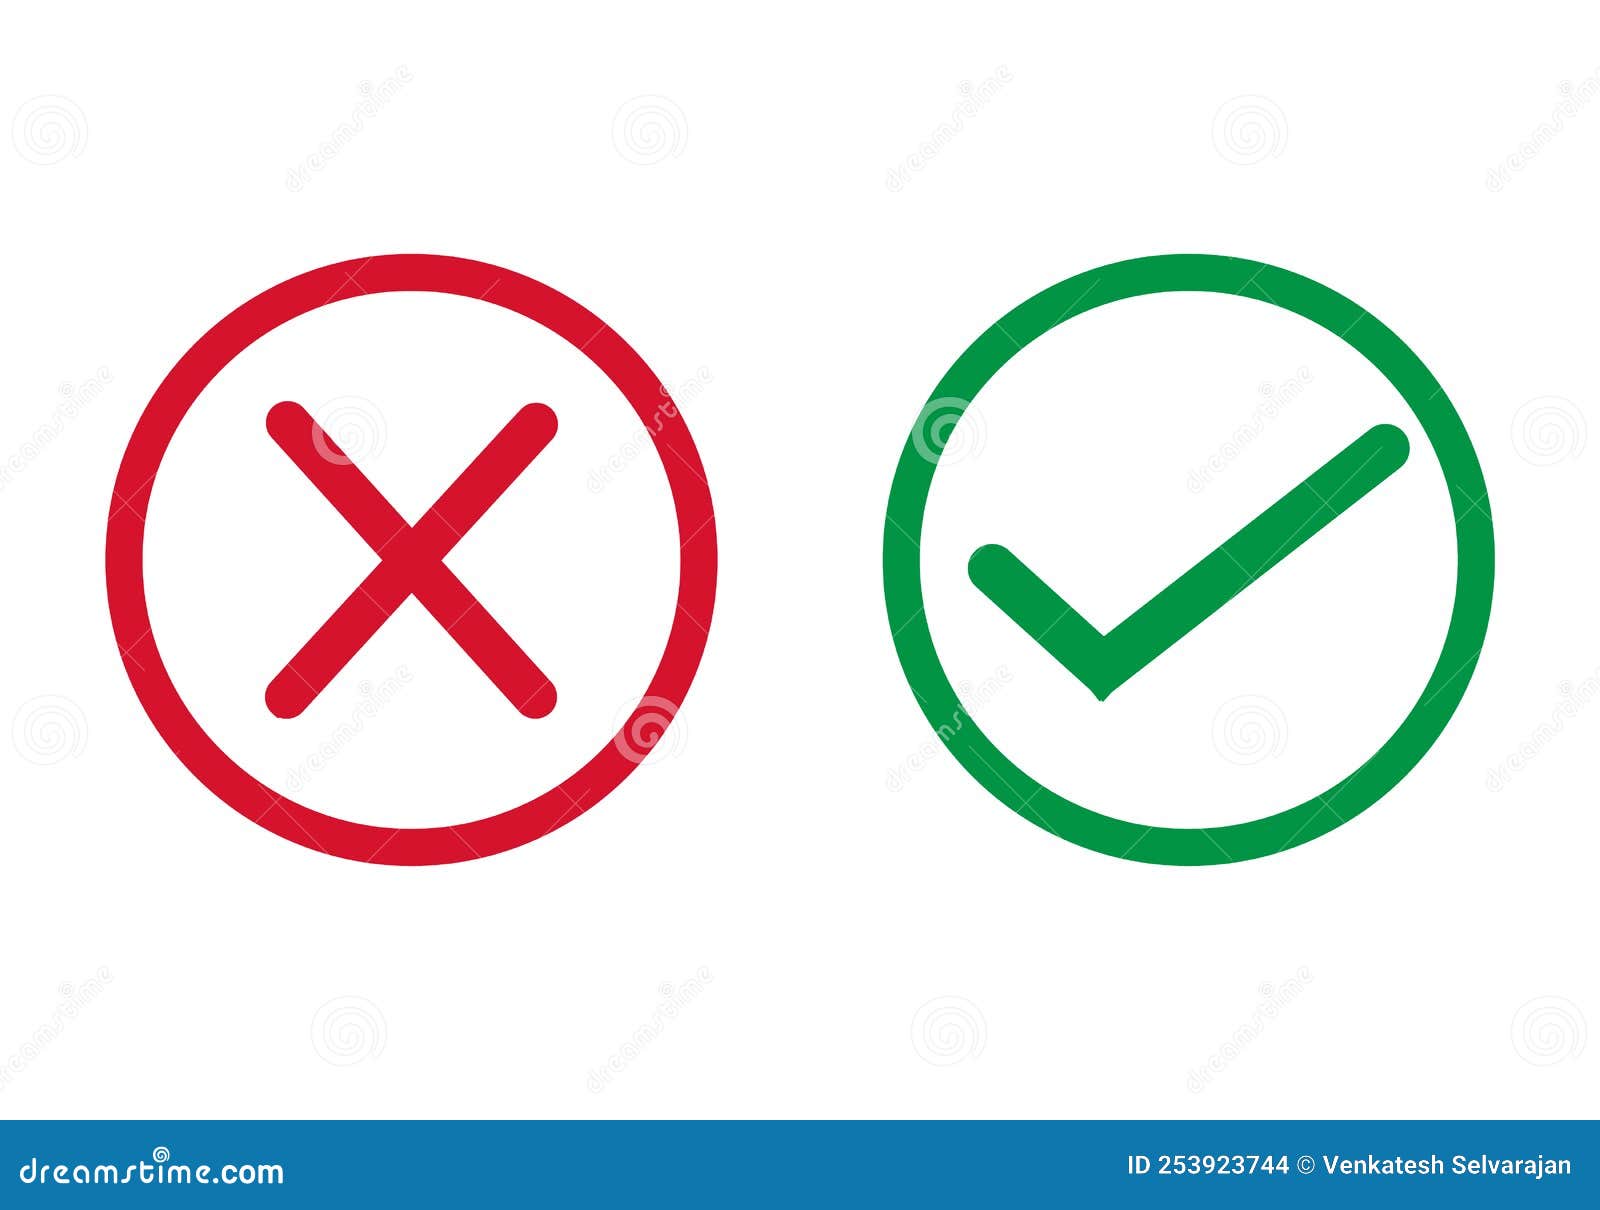 Green Tick and Red Cross Vector Illustration Stock Vector ...